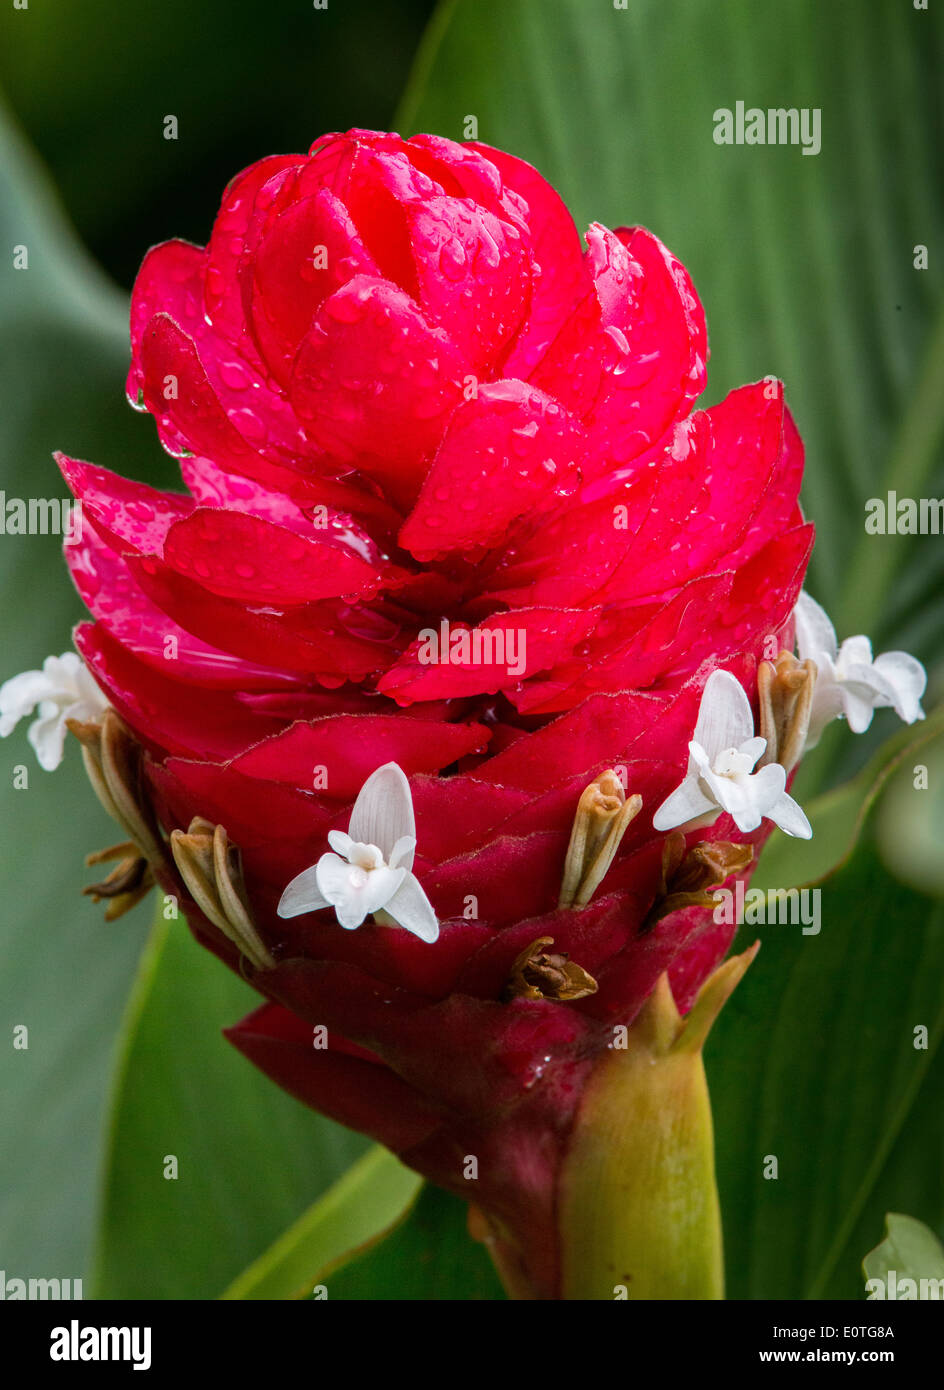 Ginger flower showing scarlet red bracts and true white flowers - Costa Rica Stock Photo